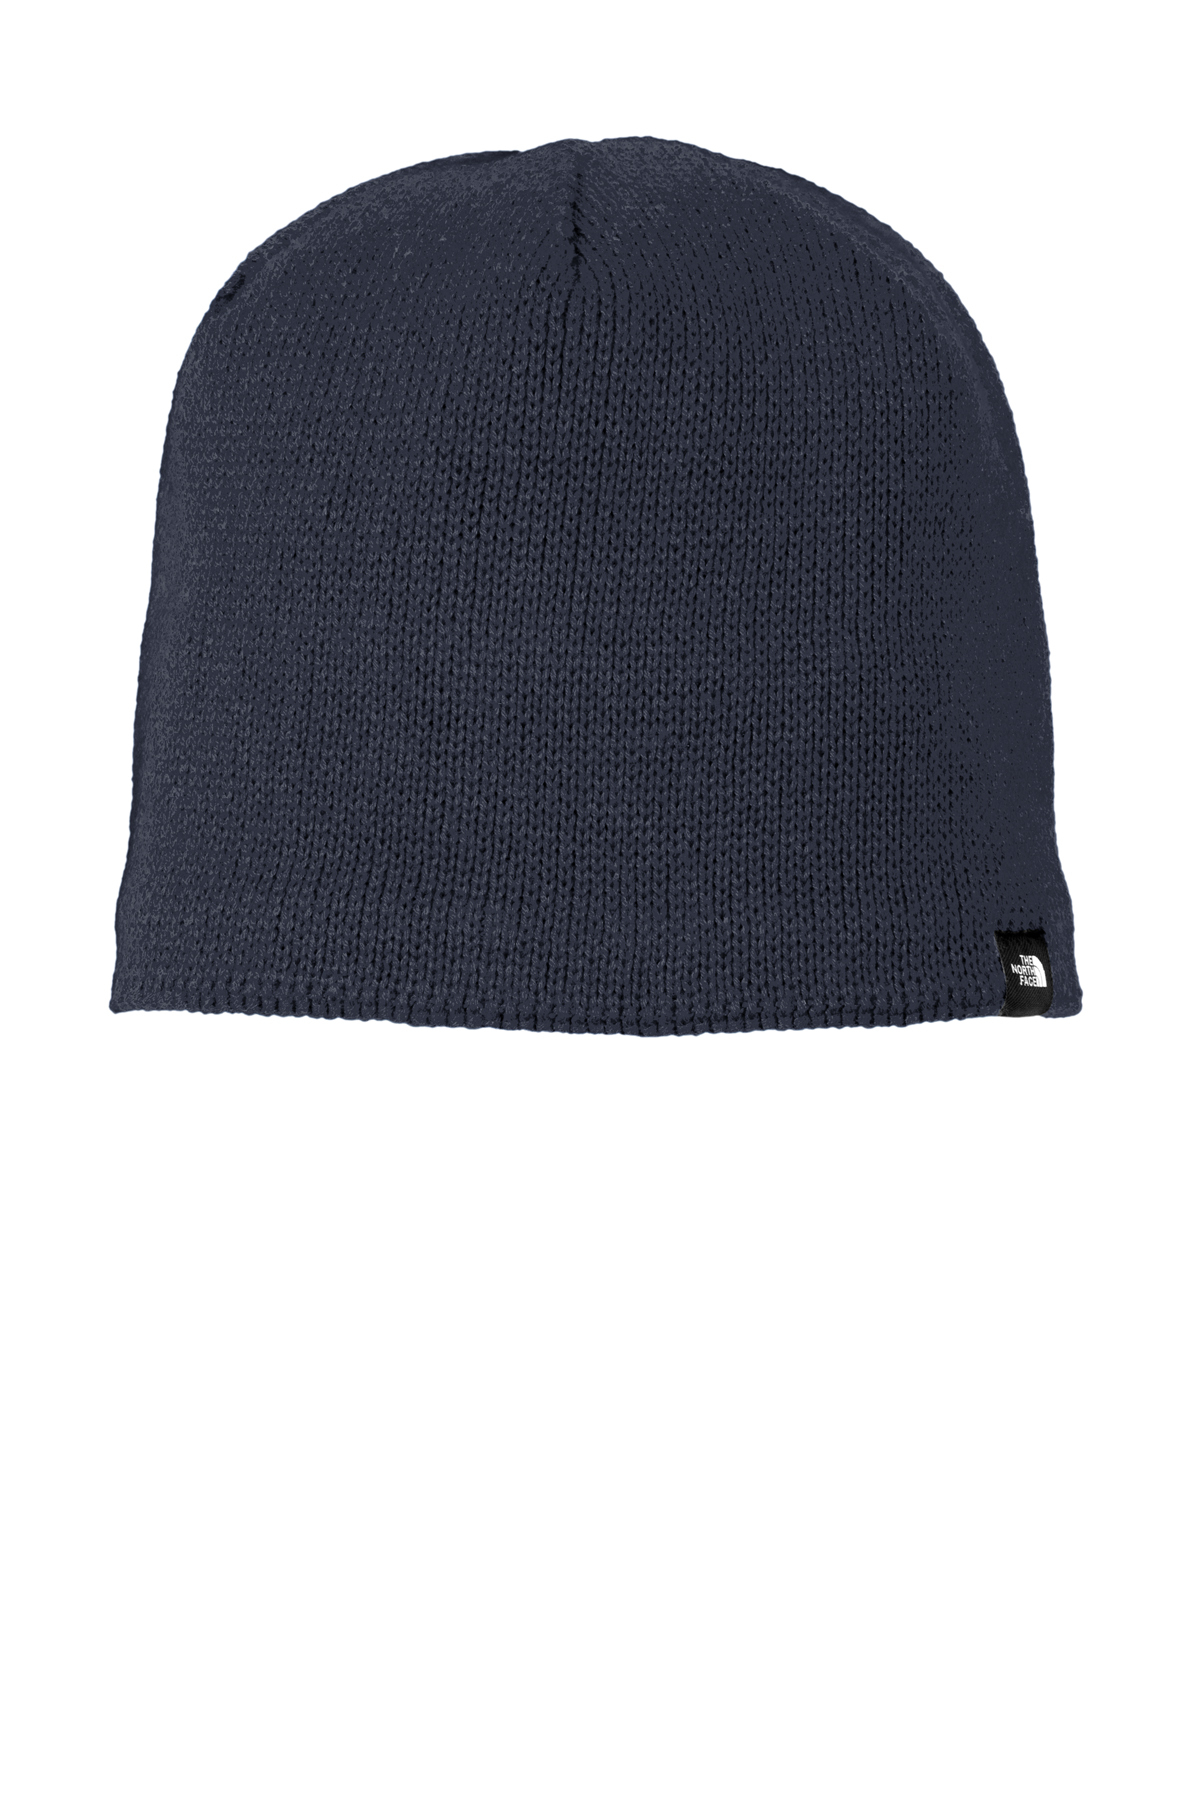 | Mountain Face SanMar North | Product The Beanie